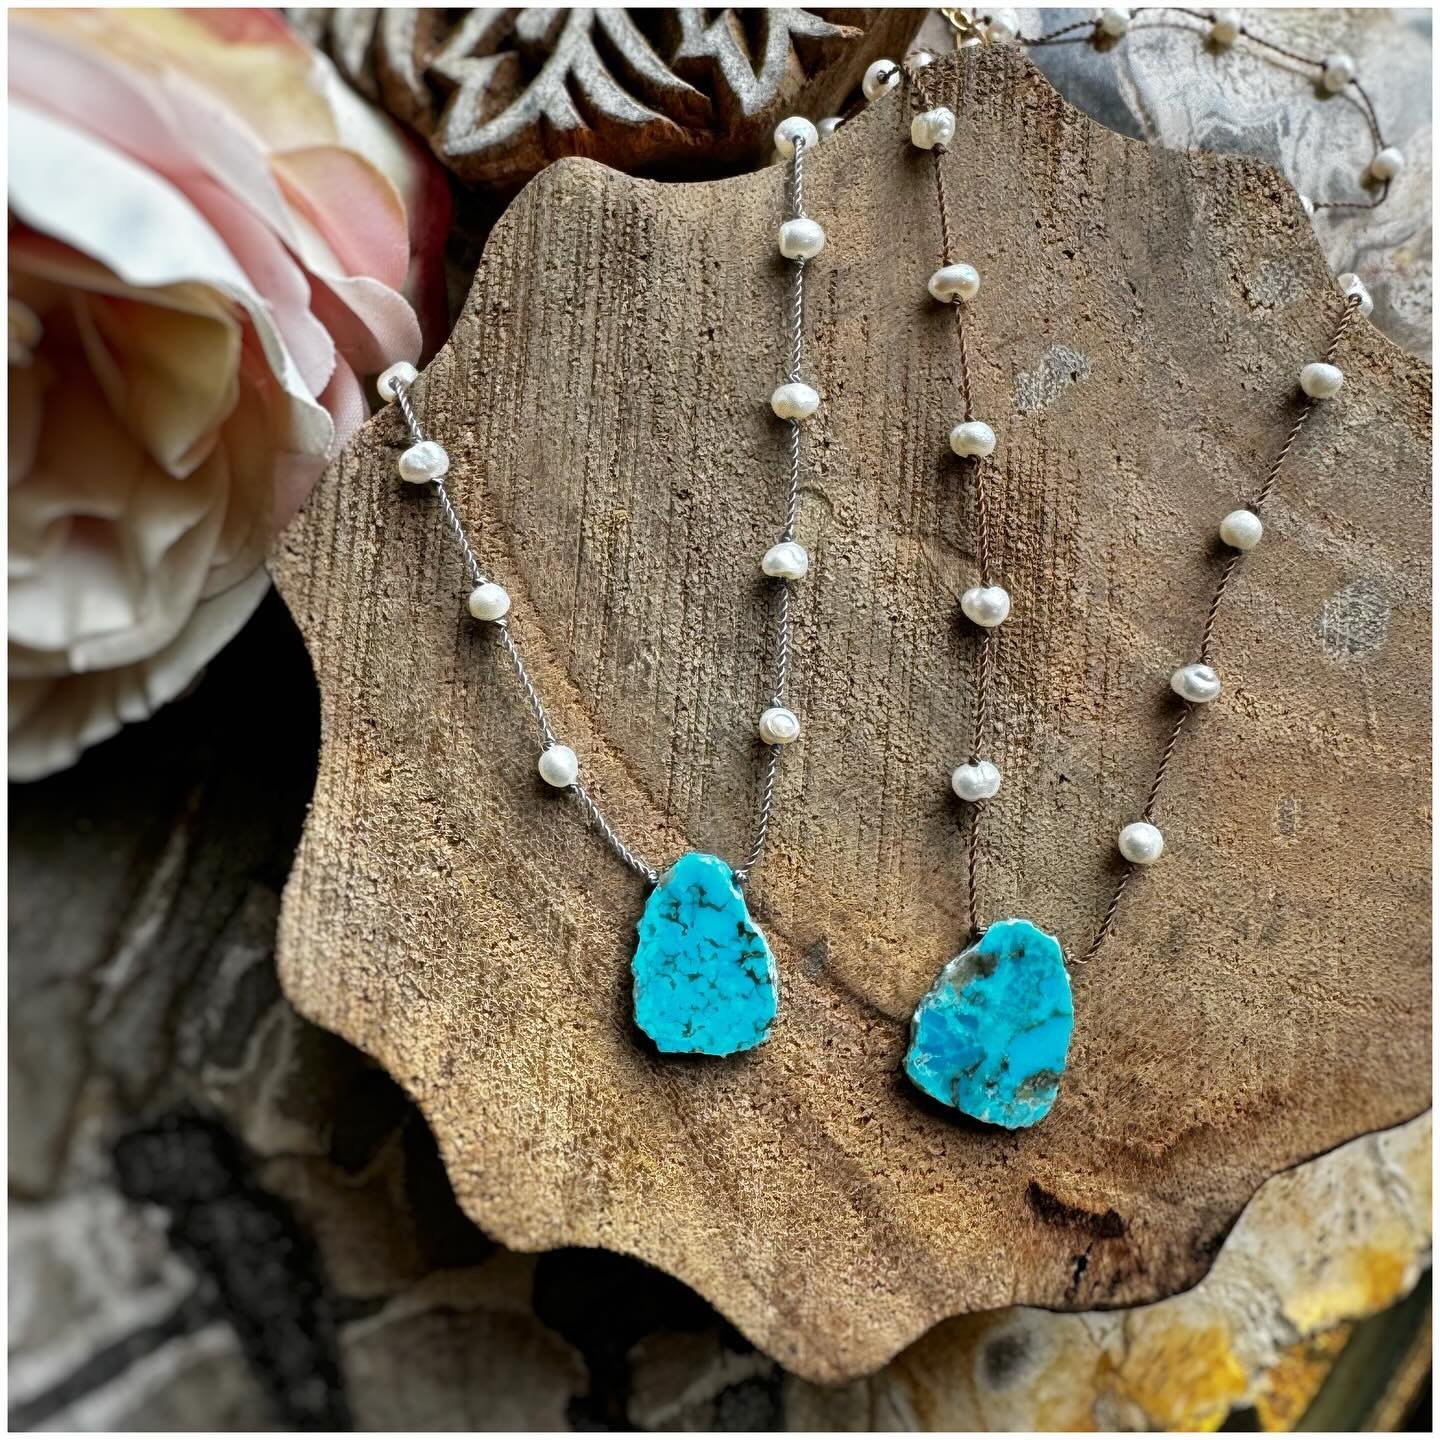 Happy Friday!! Do we need some Turquoise ...YES, I think we do!!! I came across these gorgeous live-edge Turquoise slices a few months ago. So I let them sit on my table for a month or two waiting to talk to me. I really wanted to do them justice ...